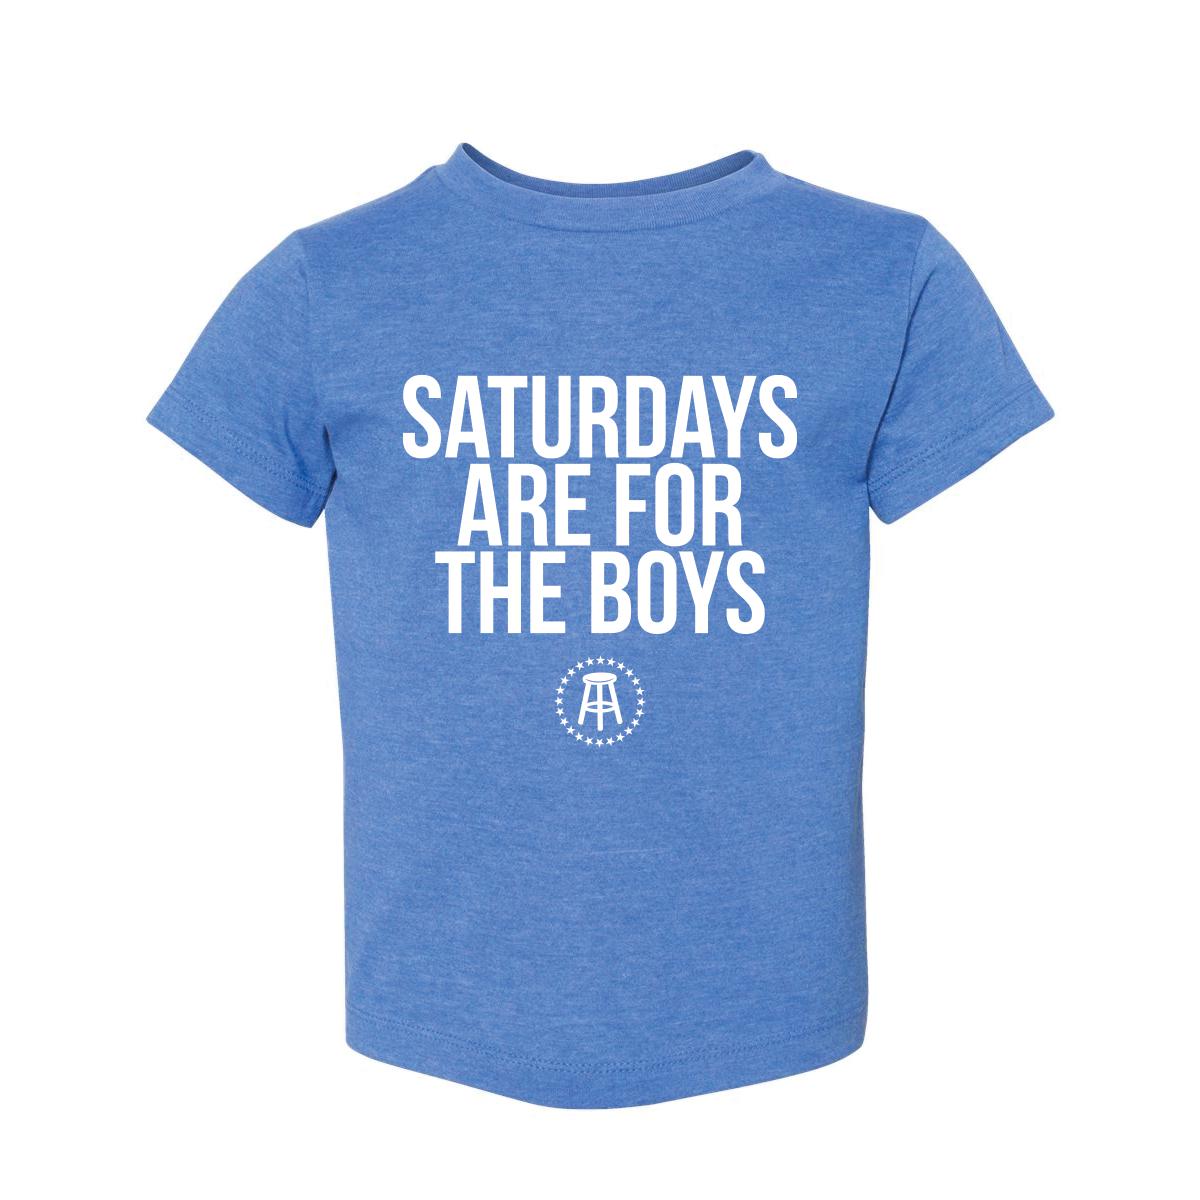 Saturdays Are For The Boys Toddler Tee-Kids Apparel-SAFTB-Blue-2T-Barstool Sports